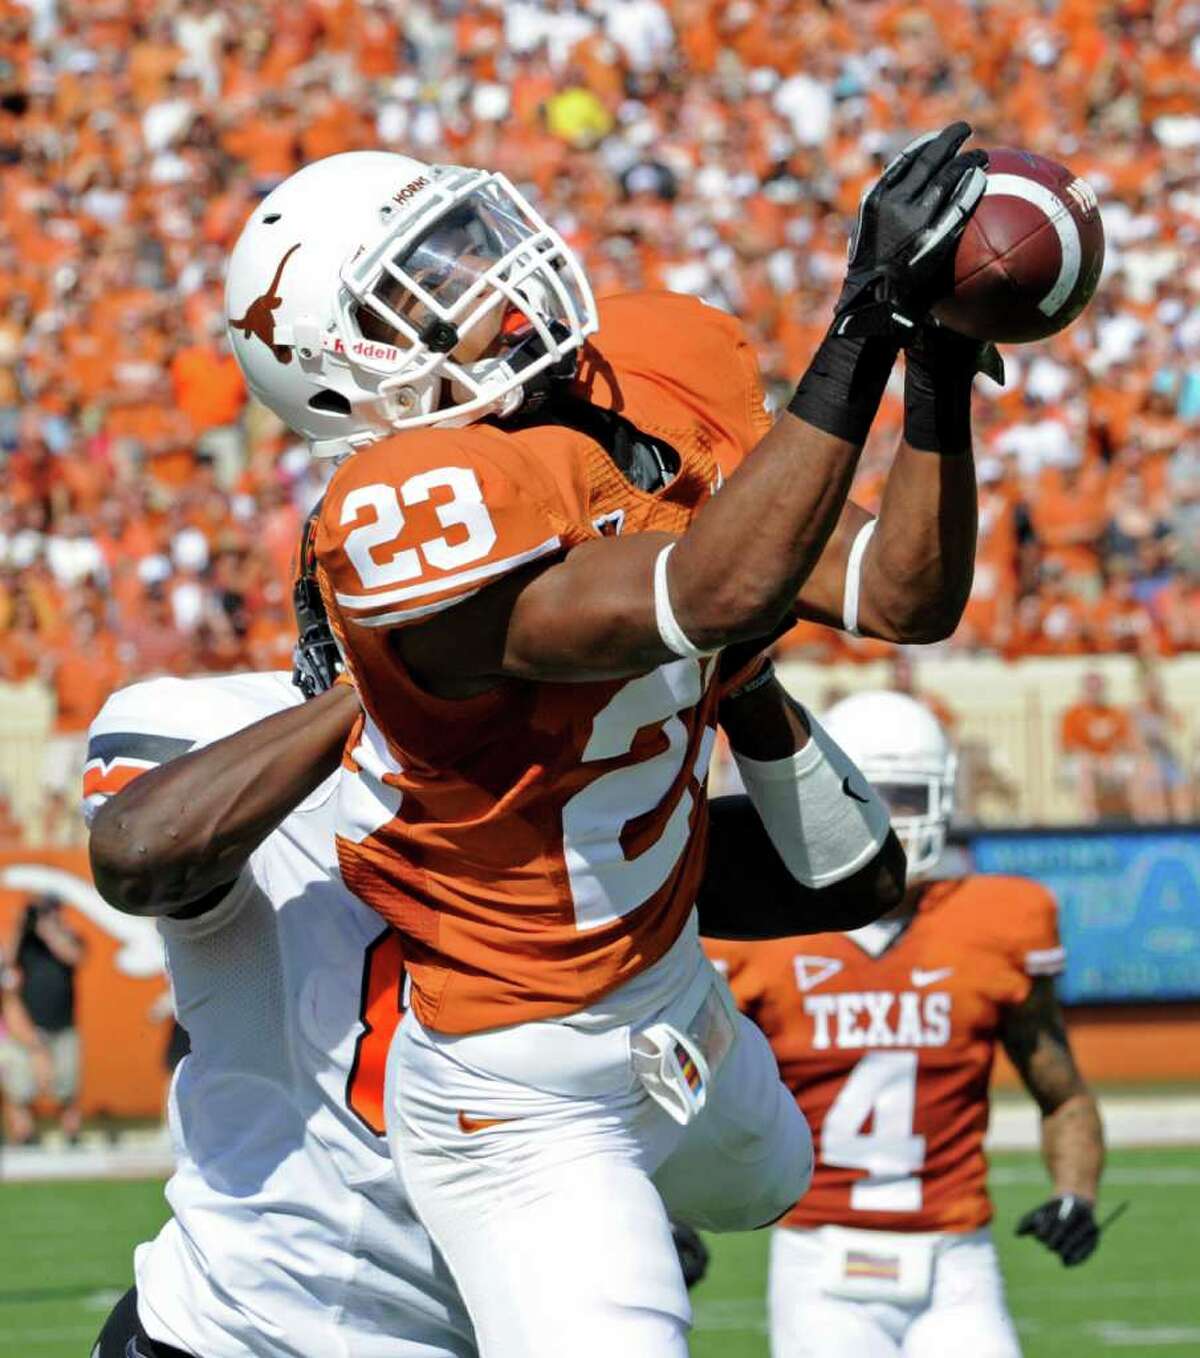 UT cornerback Carrington Byndom pulls down a pass intended for Oklahoma State’s Justin Blackmon. Upon review, however, it was ruled that Byndom came down out of bounds. MICHAEL THOMAS/ASSOCIATED PRESS